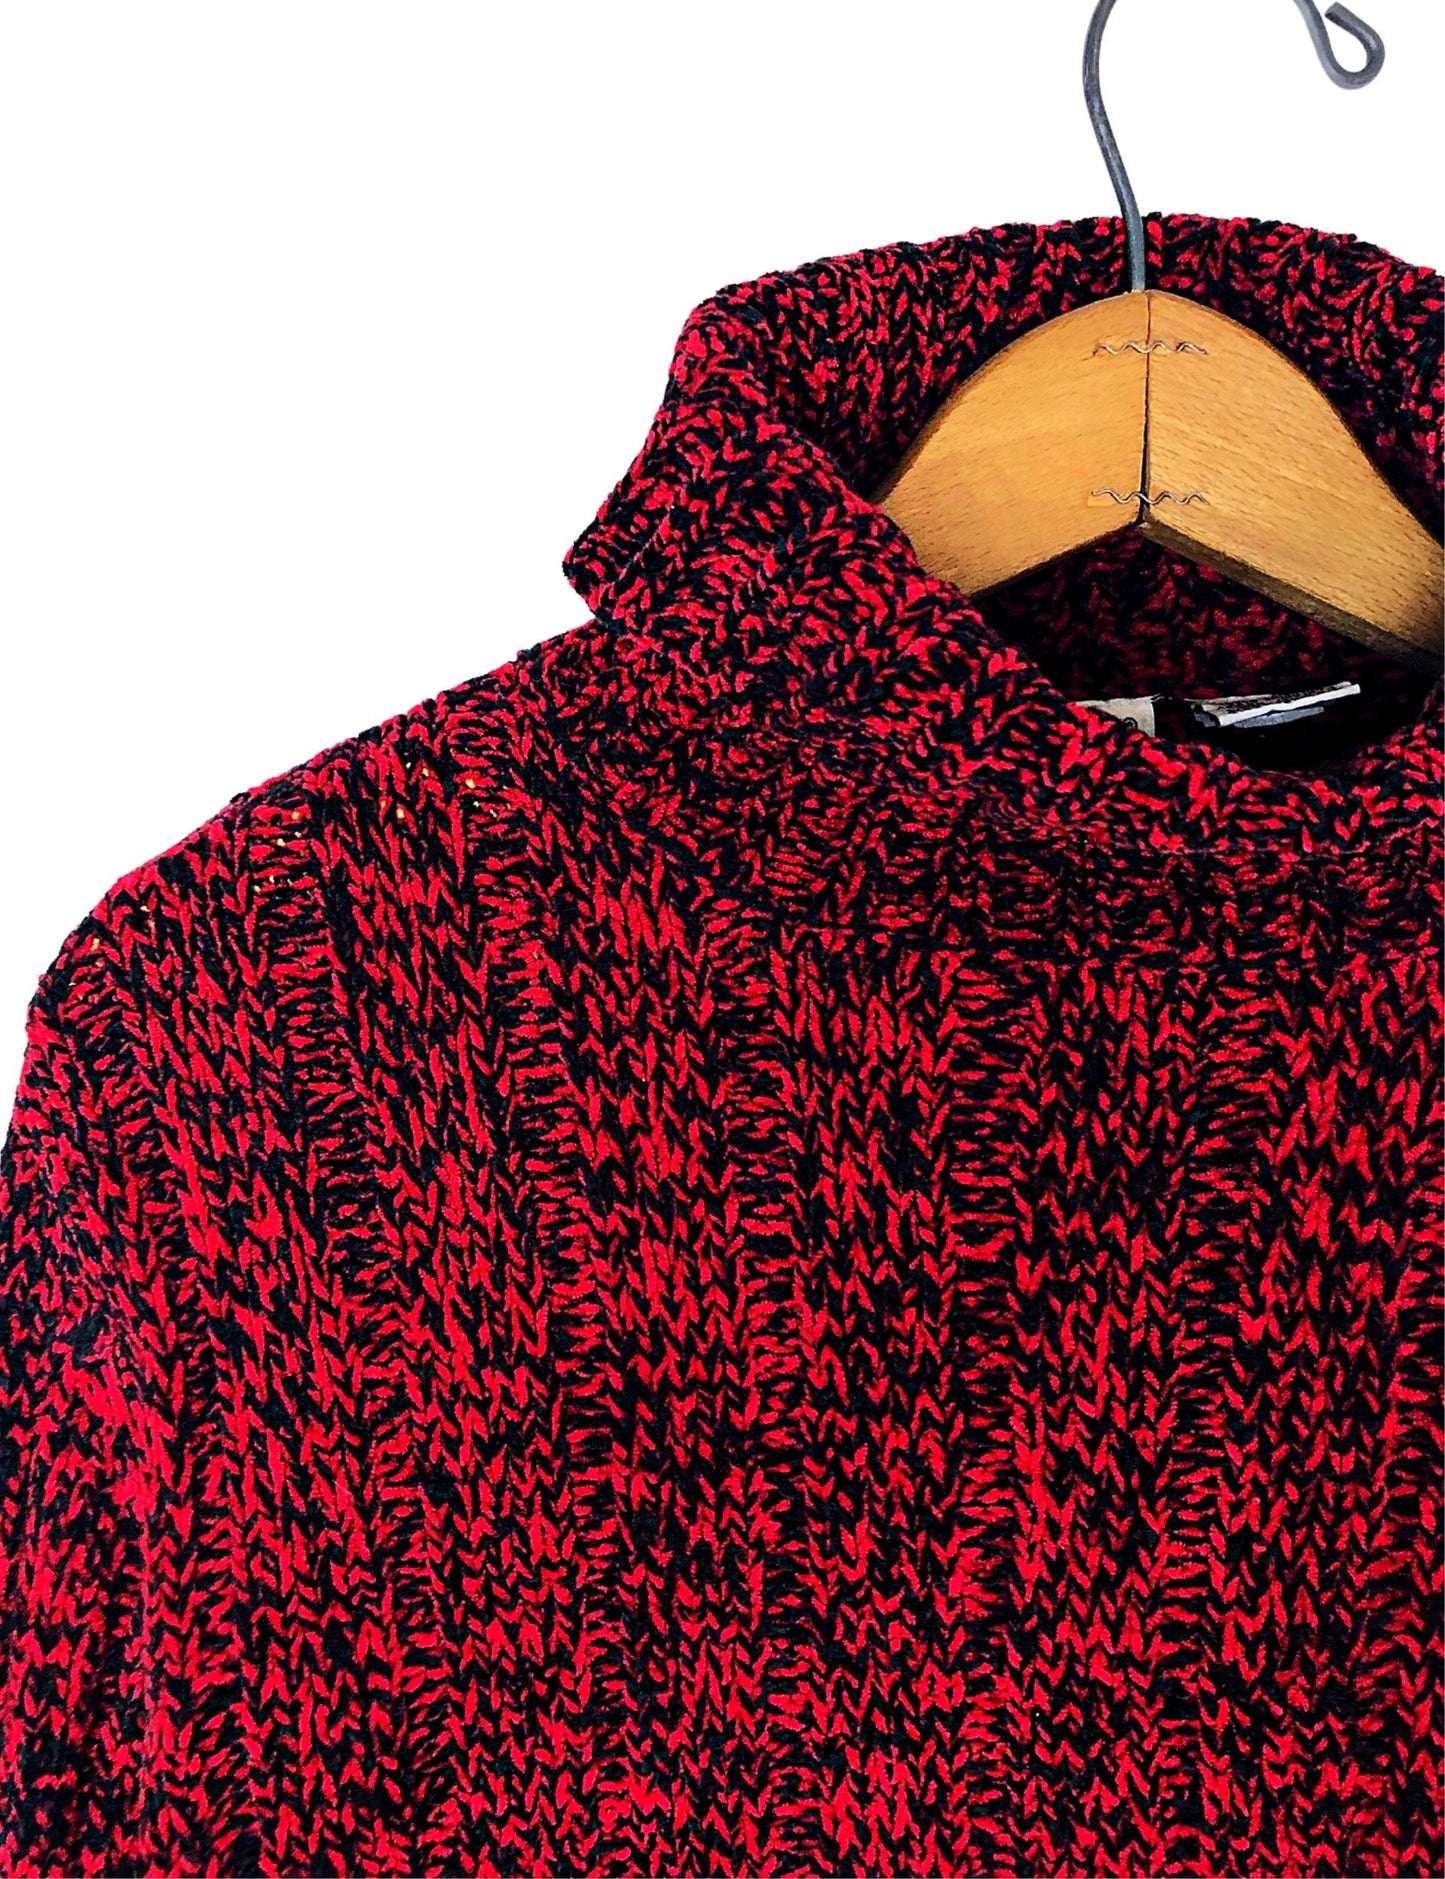 90’s Super Soft Red & Black Marled Chunky Knit Thick Turtleneck Sweater Size Medium